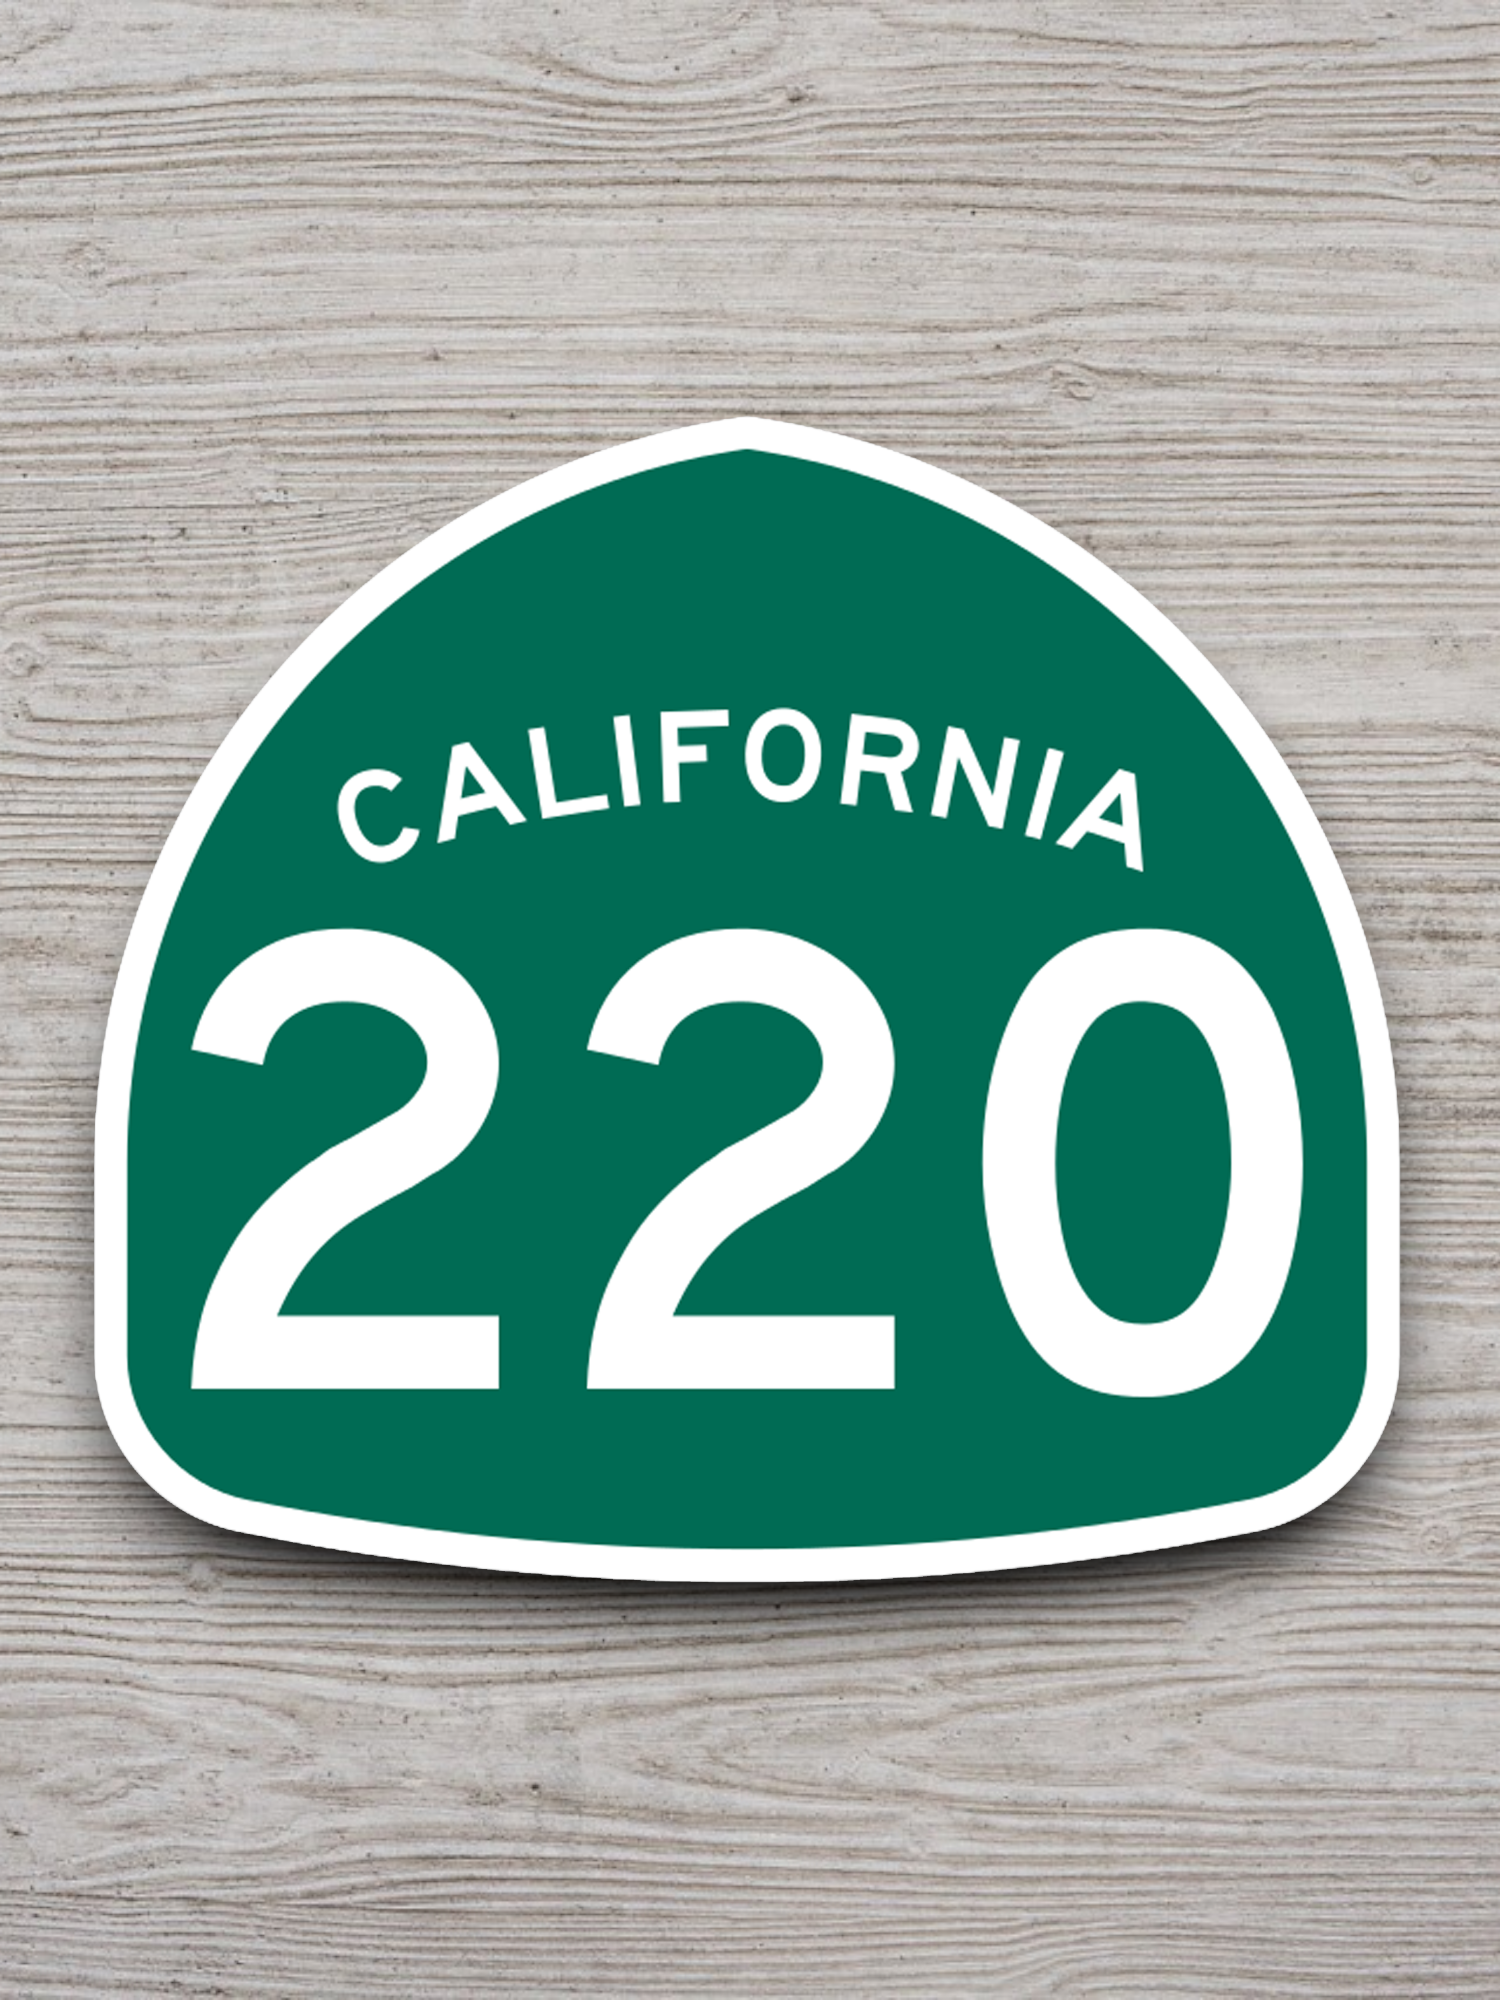 California State Route 220 Road Sign Sticker